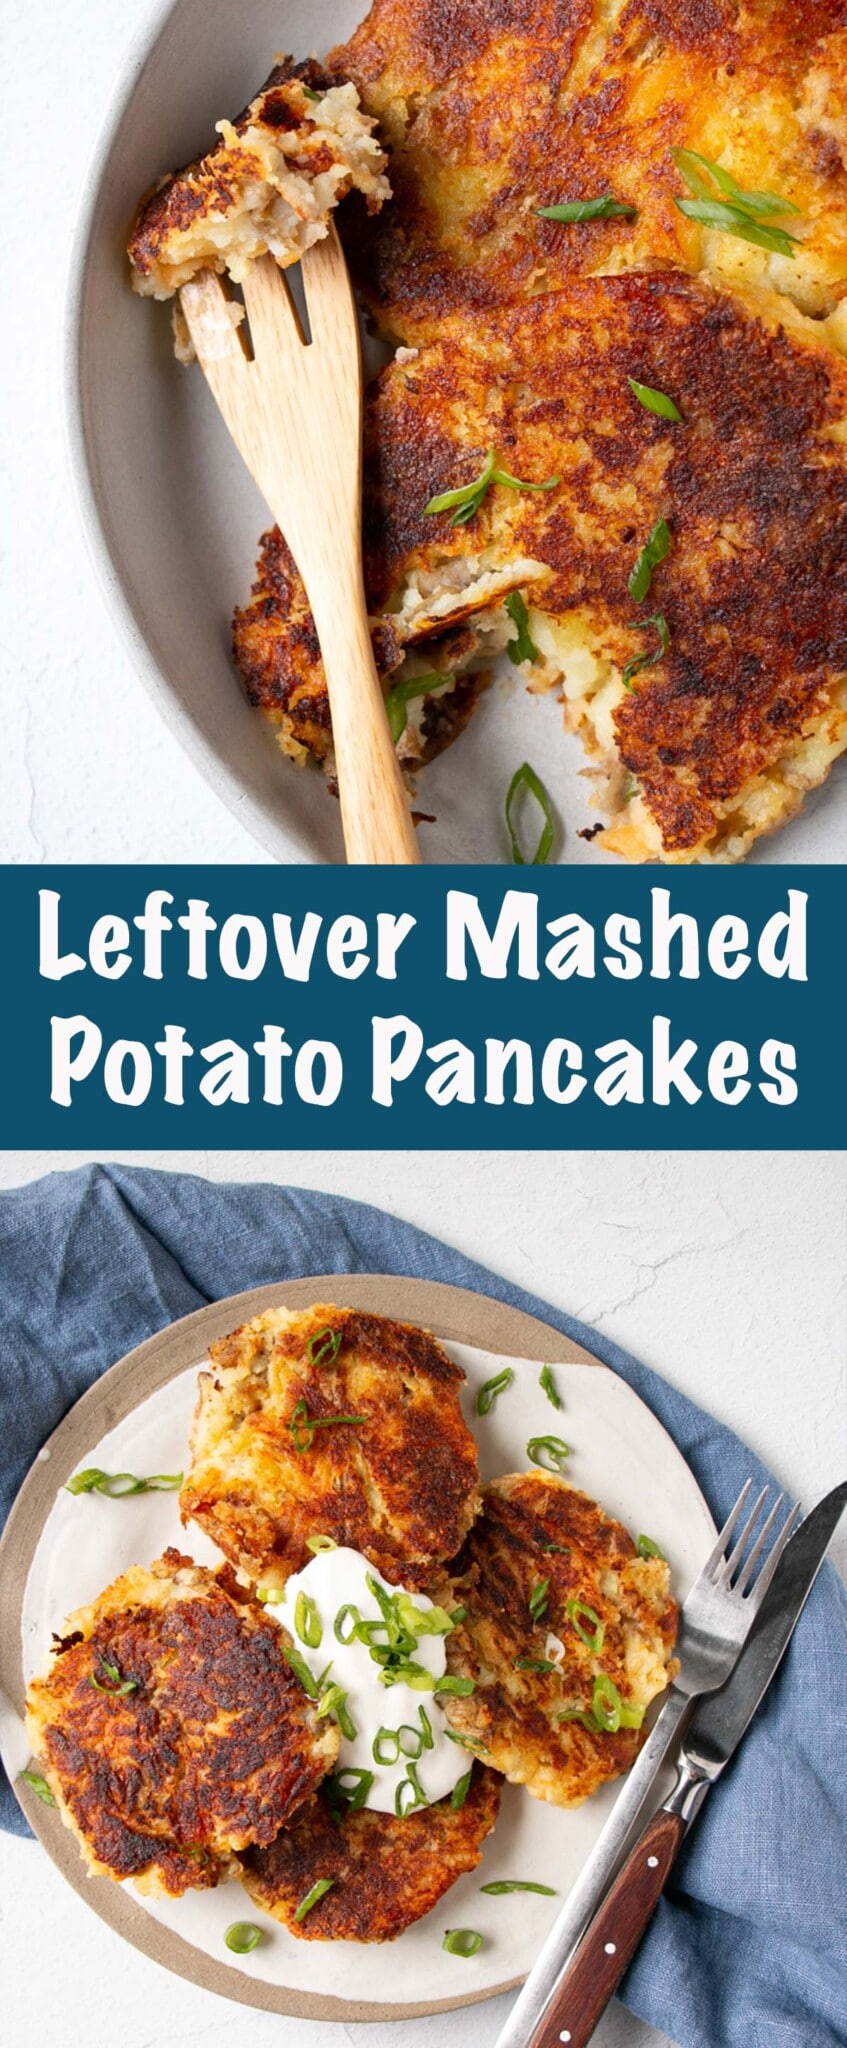 Crispy golden brown Leftover Mashed Potato Pancakes are a quick and easy way to recreate leftover mashed potatoes. Fluffy, cheesy interiors, these pancakes will be the star of any meal. via @mykitchenlove